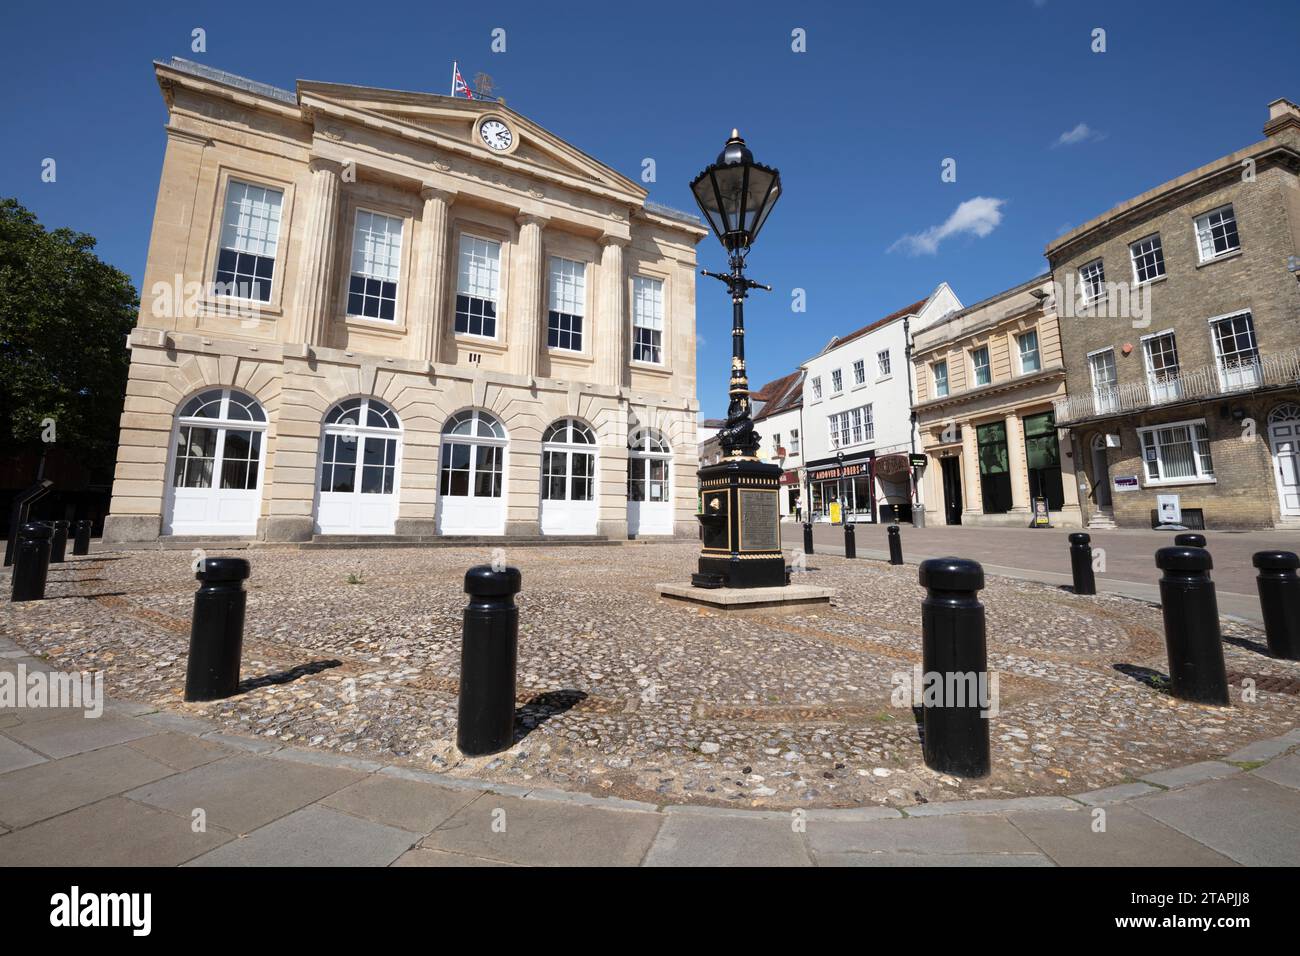 Andover Guildhall and the Jubilee Lamp Column on the High Street, Andover, Hampshire, England, United Kingdom, Europe Stock Photo